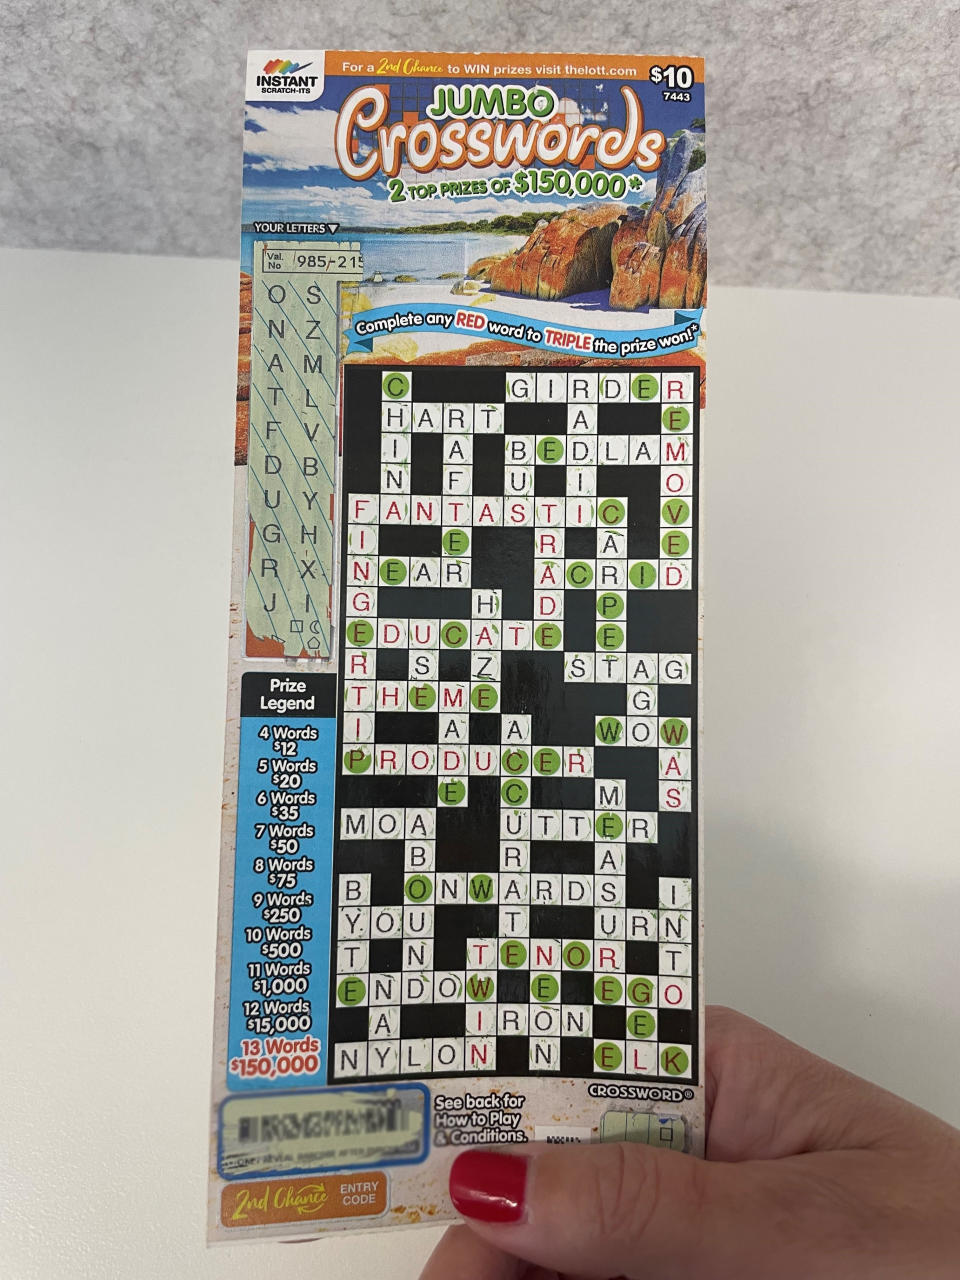 The woman's winning Mother's Day Jumbo Crossword scratch card.